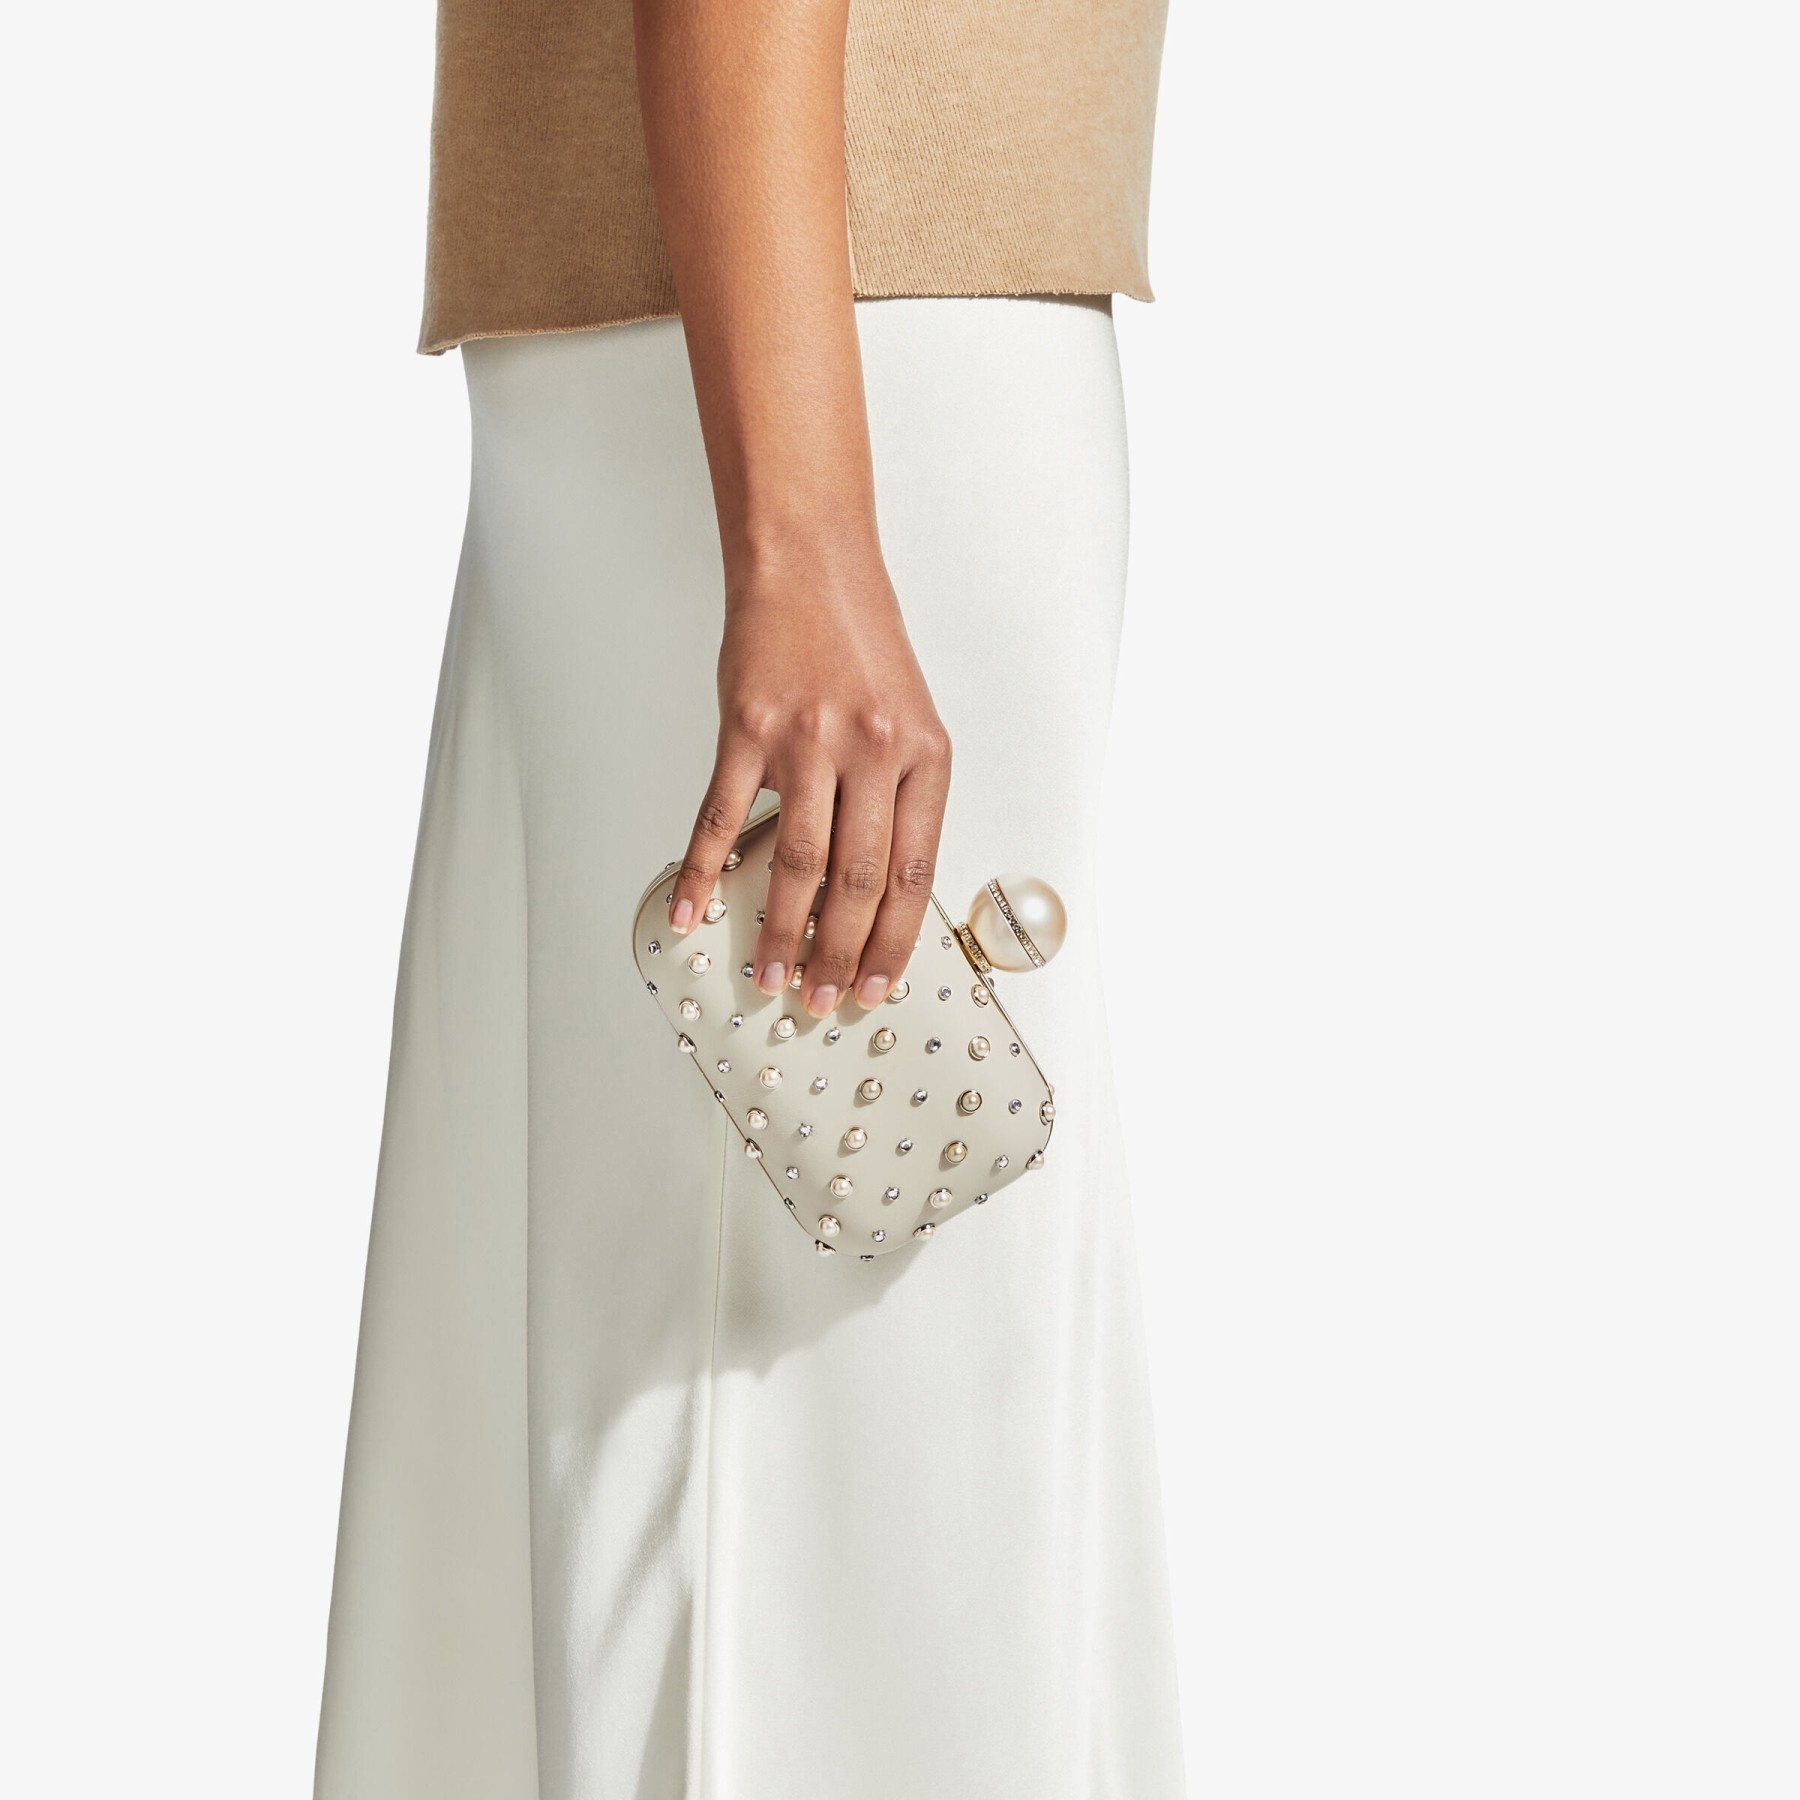 Cloud
Pearl Mix Clutch Bag with Ball Clasp - 2